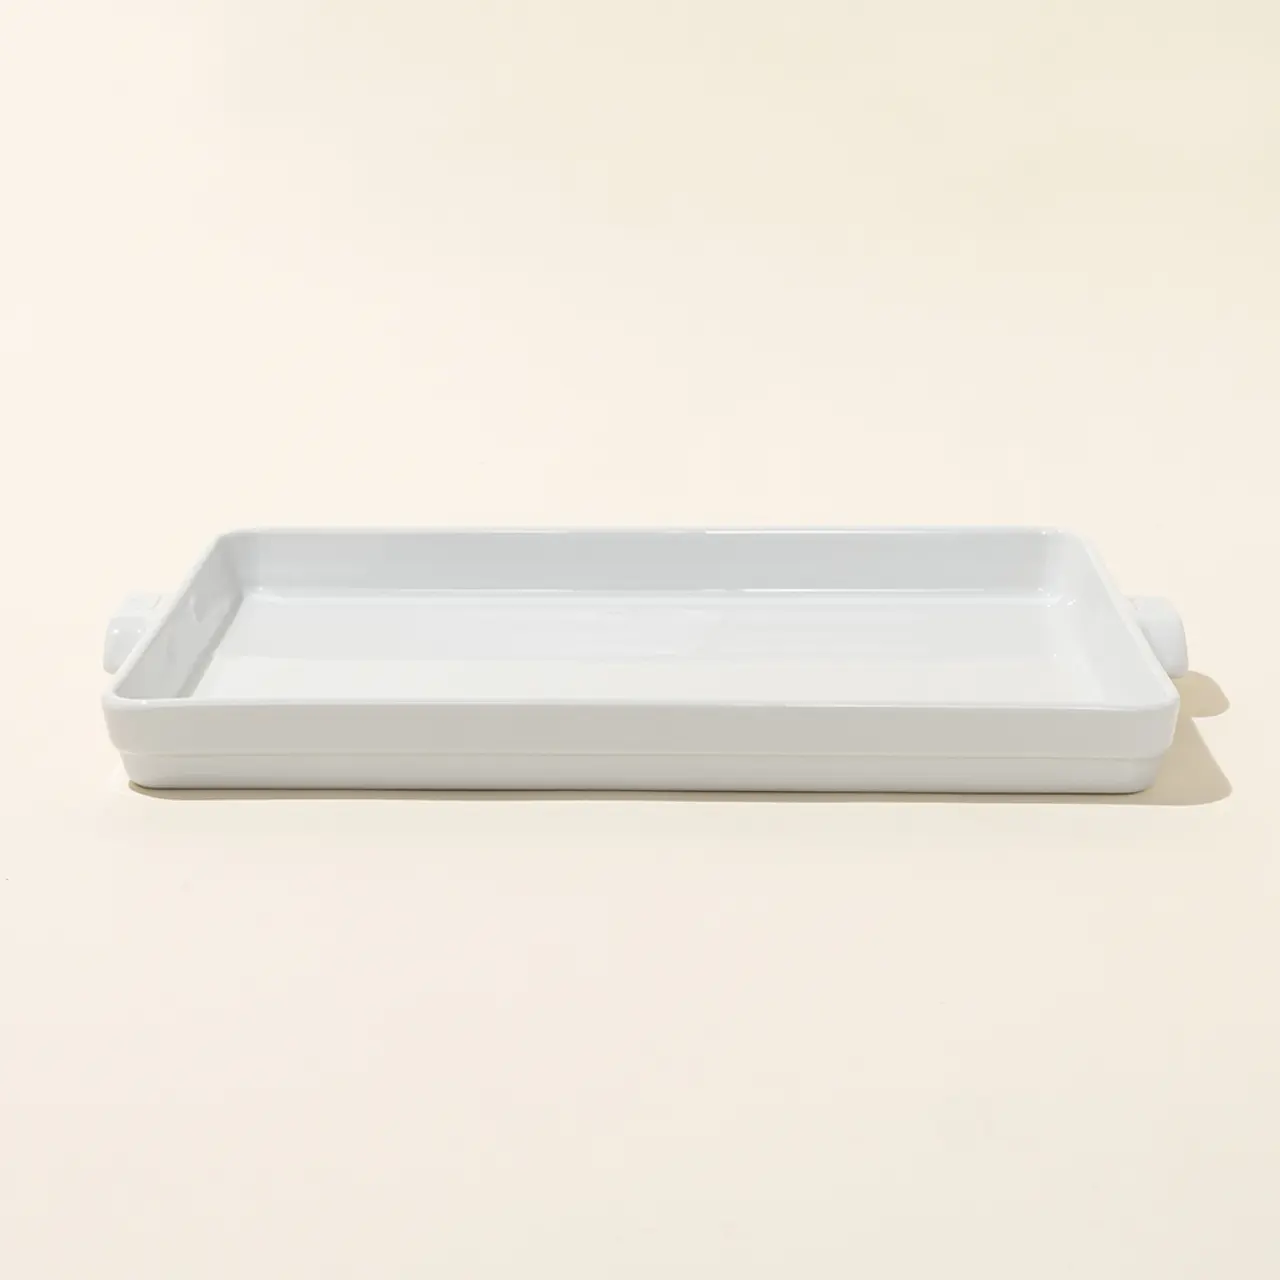 A simple white rectangular ceramic dish rests on a neutral backdrop.